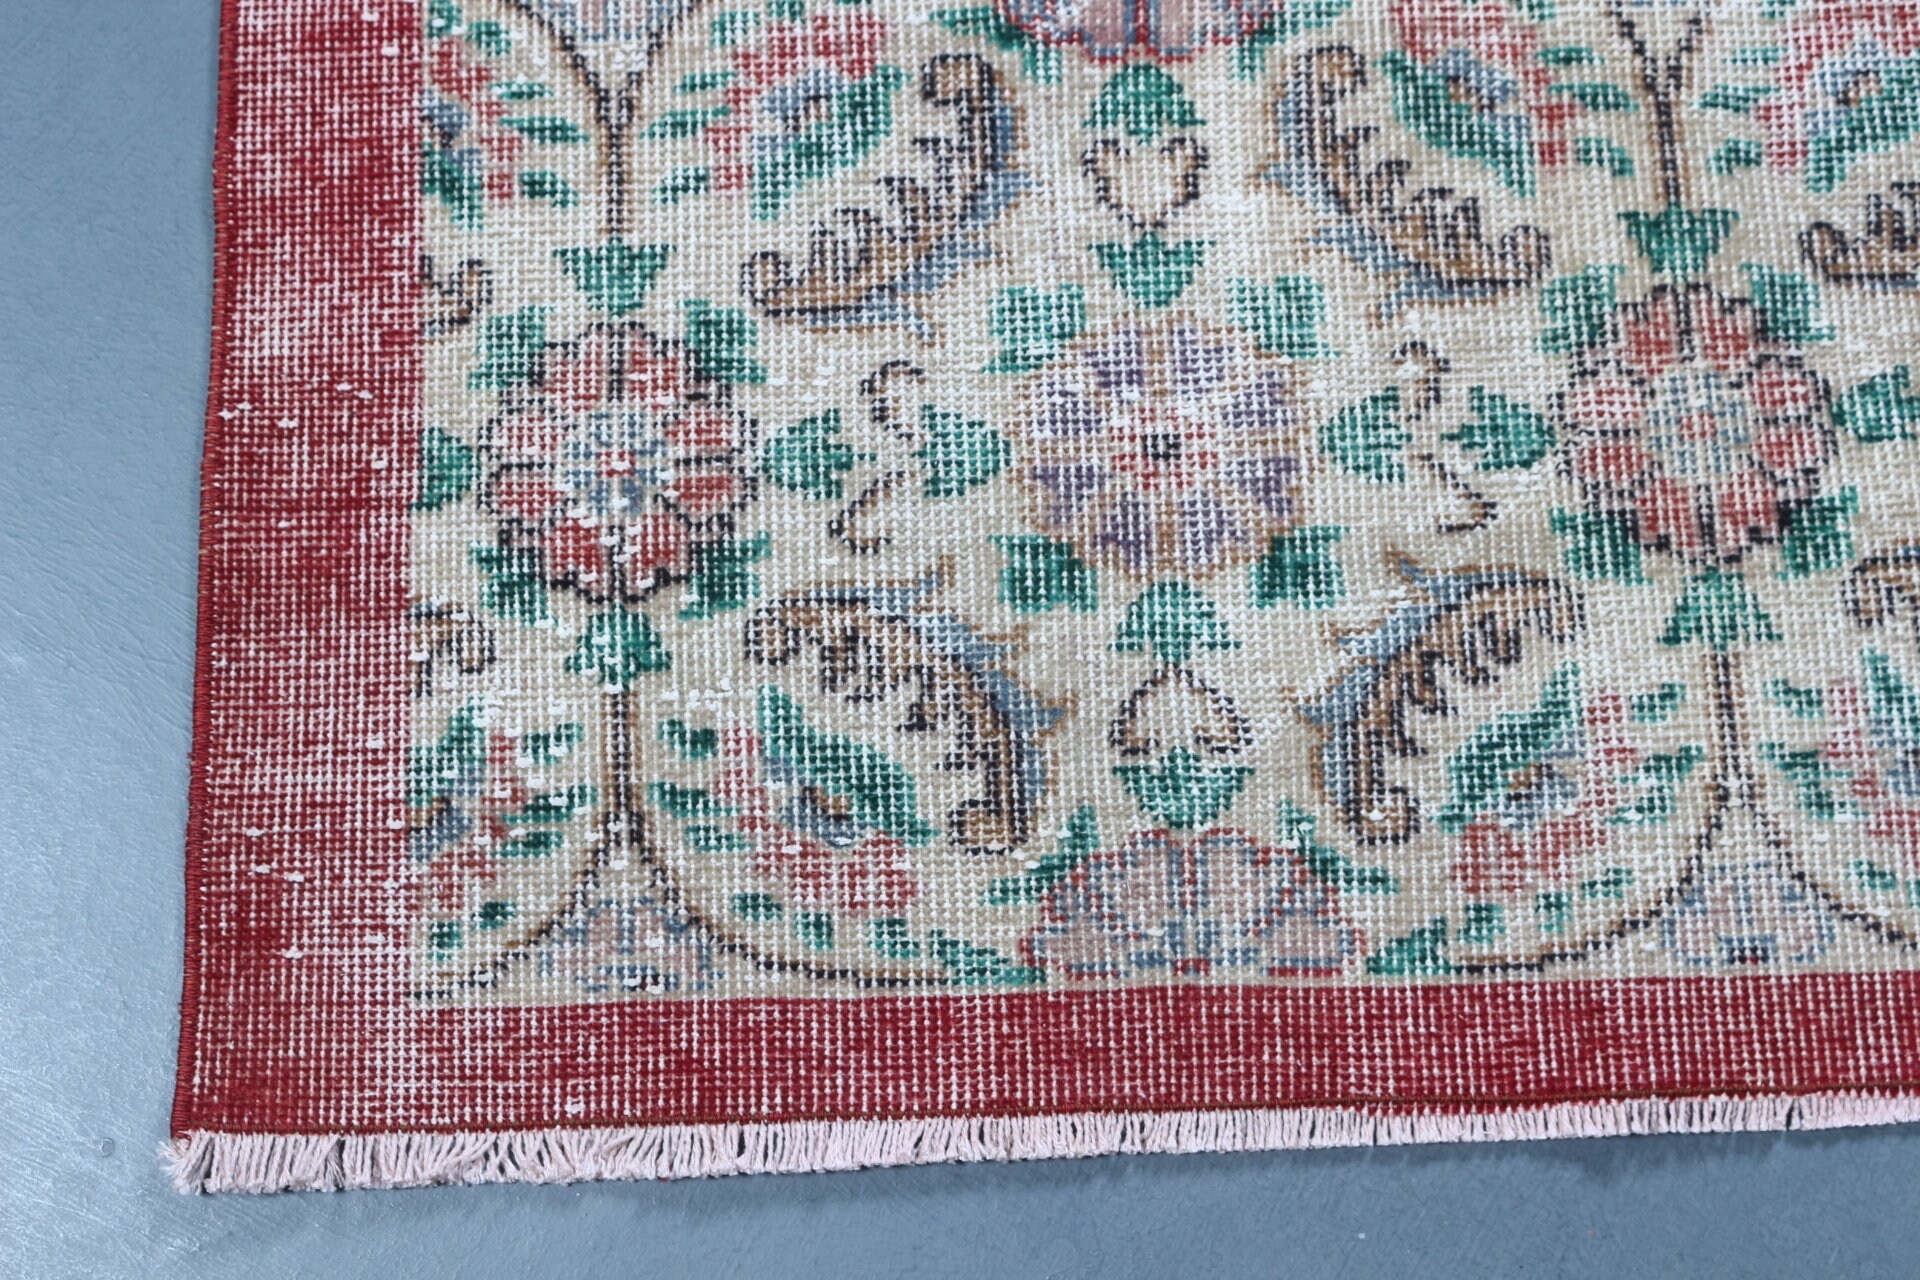 Dining Room Rug, Vintage Rug, Wool Rugs, Bedroom Rug, Turkish Rugs, Kitchen Rugs, Rugs for Kitchen, 3.8x6.5 ft Area Rug, Red Kitchen Rugs